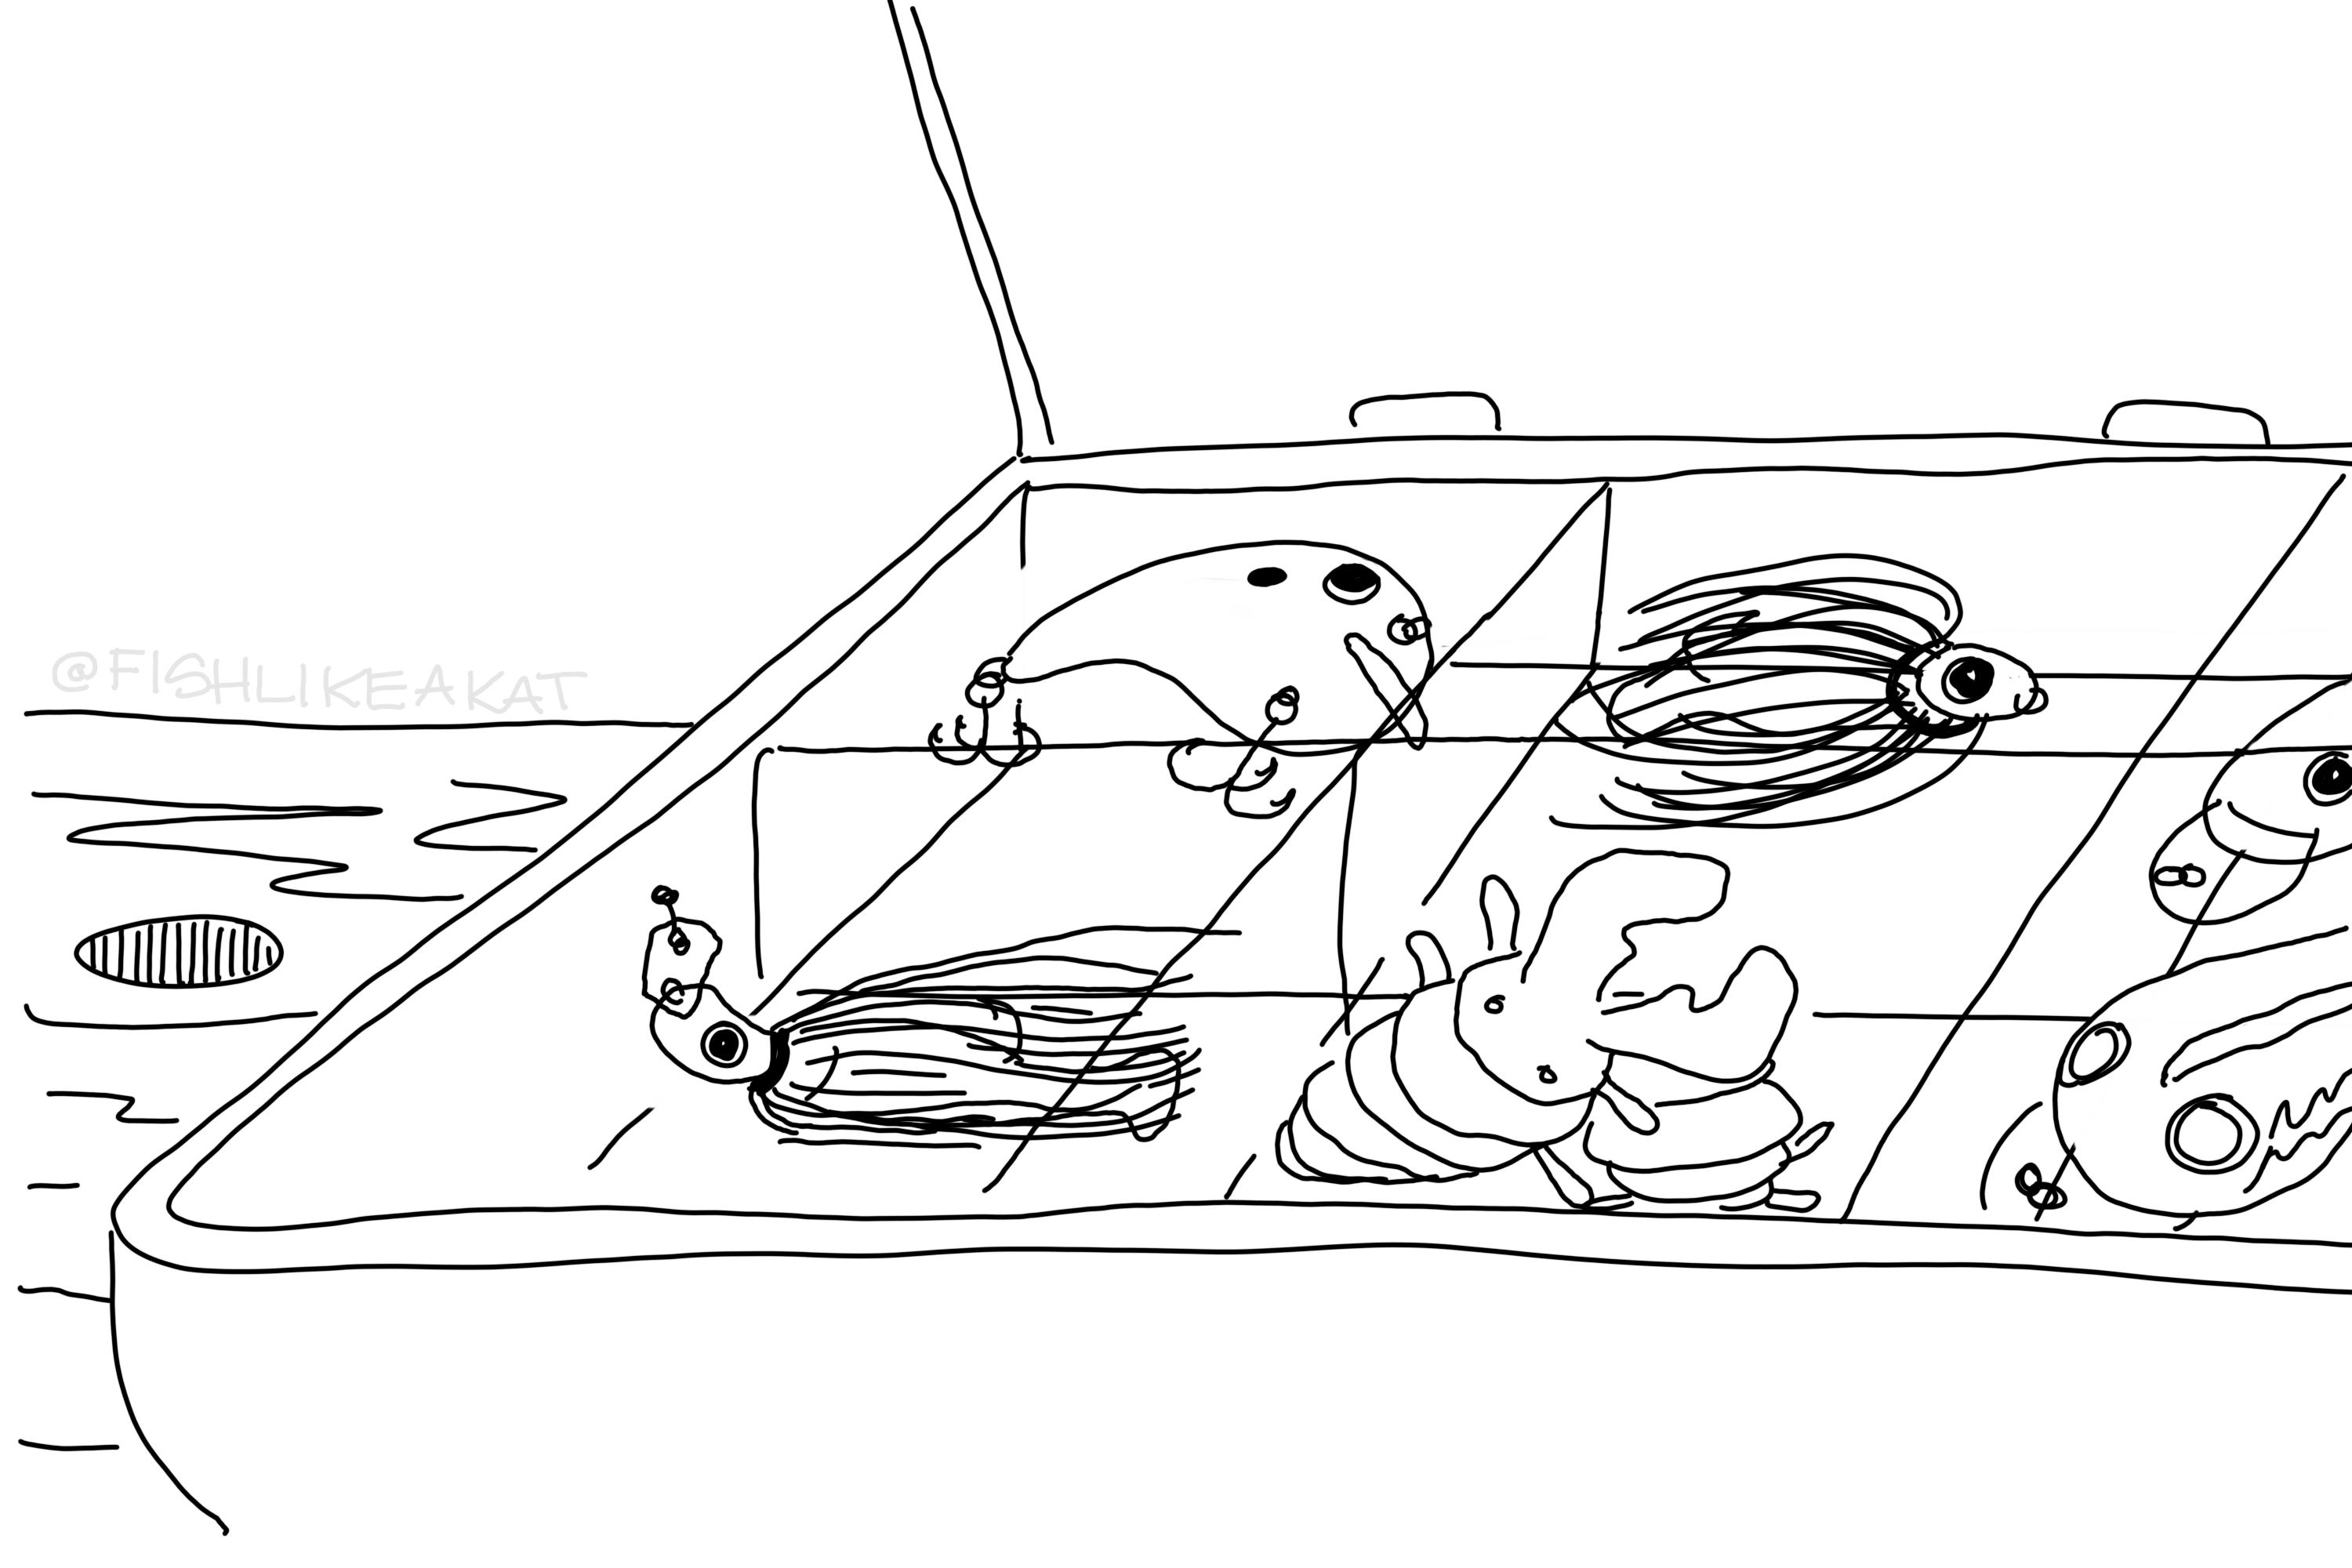 Coloring page with a closeup of a fishing tackle box with fishing lures